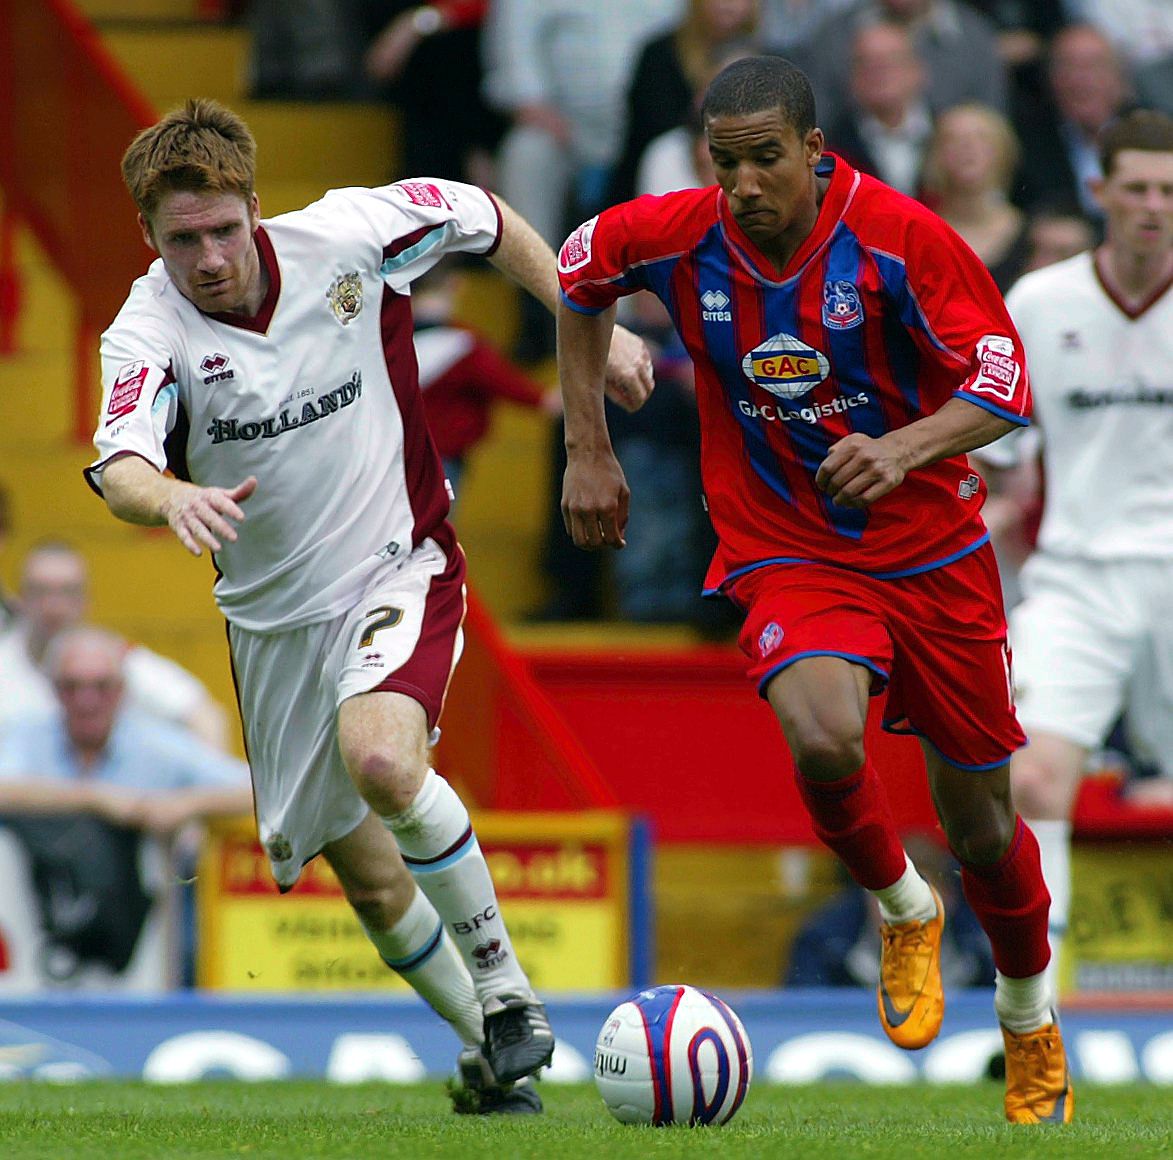 Football - Crystal Palace v Burnley Coca-Cola Football League Championship  - Selhurst Park - 4/5/08 
Scott Sinclair (R) of Crystal Palace in action with James O'Connor of Burnley 
Mandatory Credit: Action Images / David Field 
Livepic